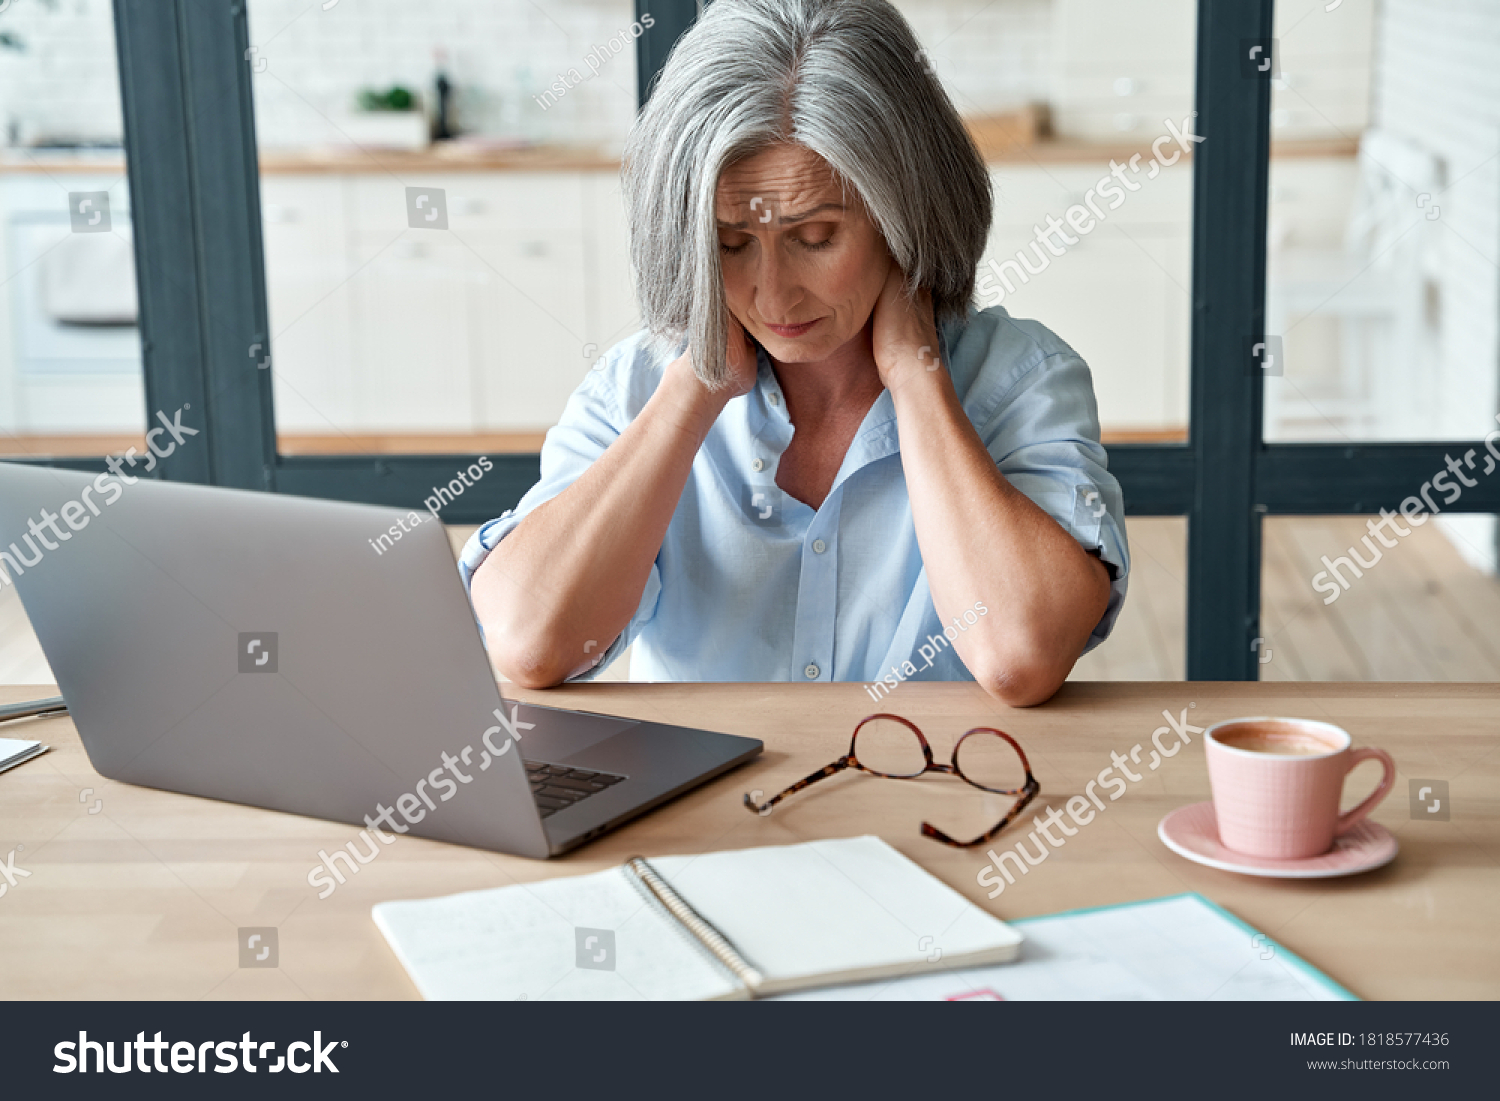 Tired stressed old mature business woman suffering from neckpain working from home office sitting at table. Overworked senior middle aged lady massaging neck feeling hurt pain from incorrect posture. #1818577436